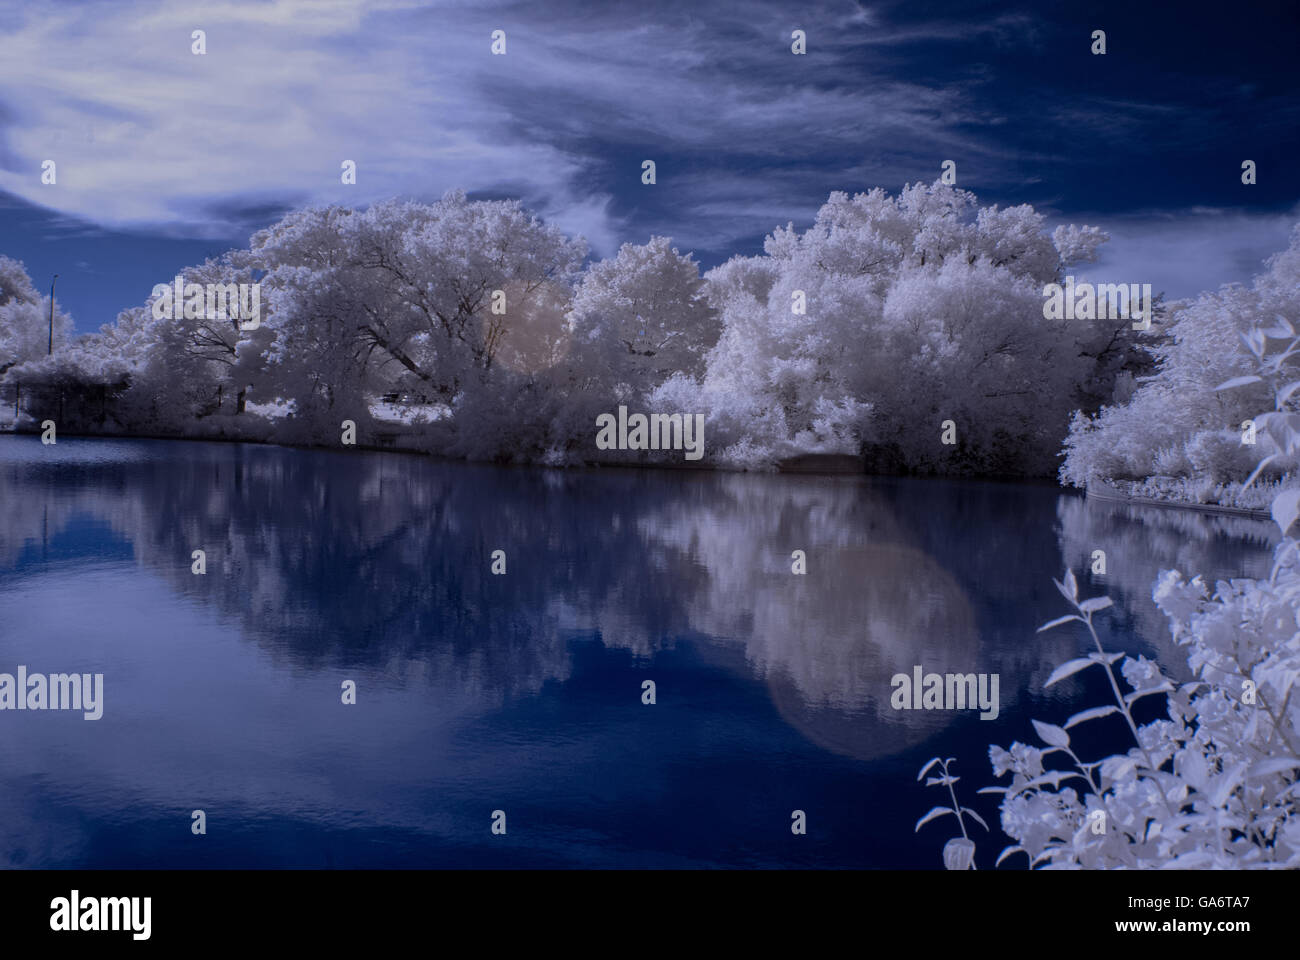 Infra red photo of a pond  / trees Stock Photo